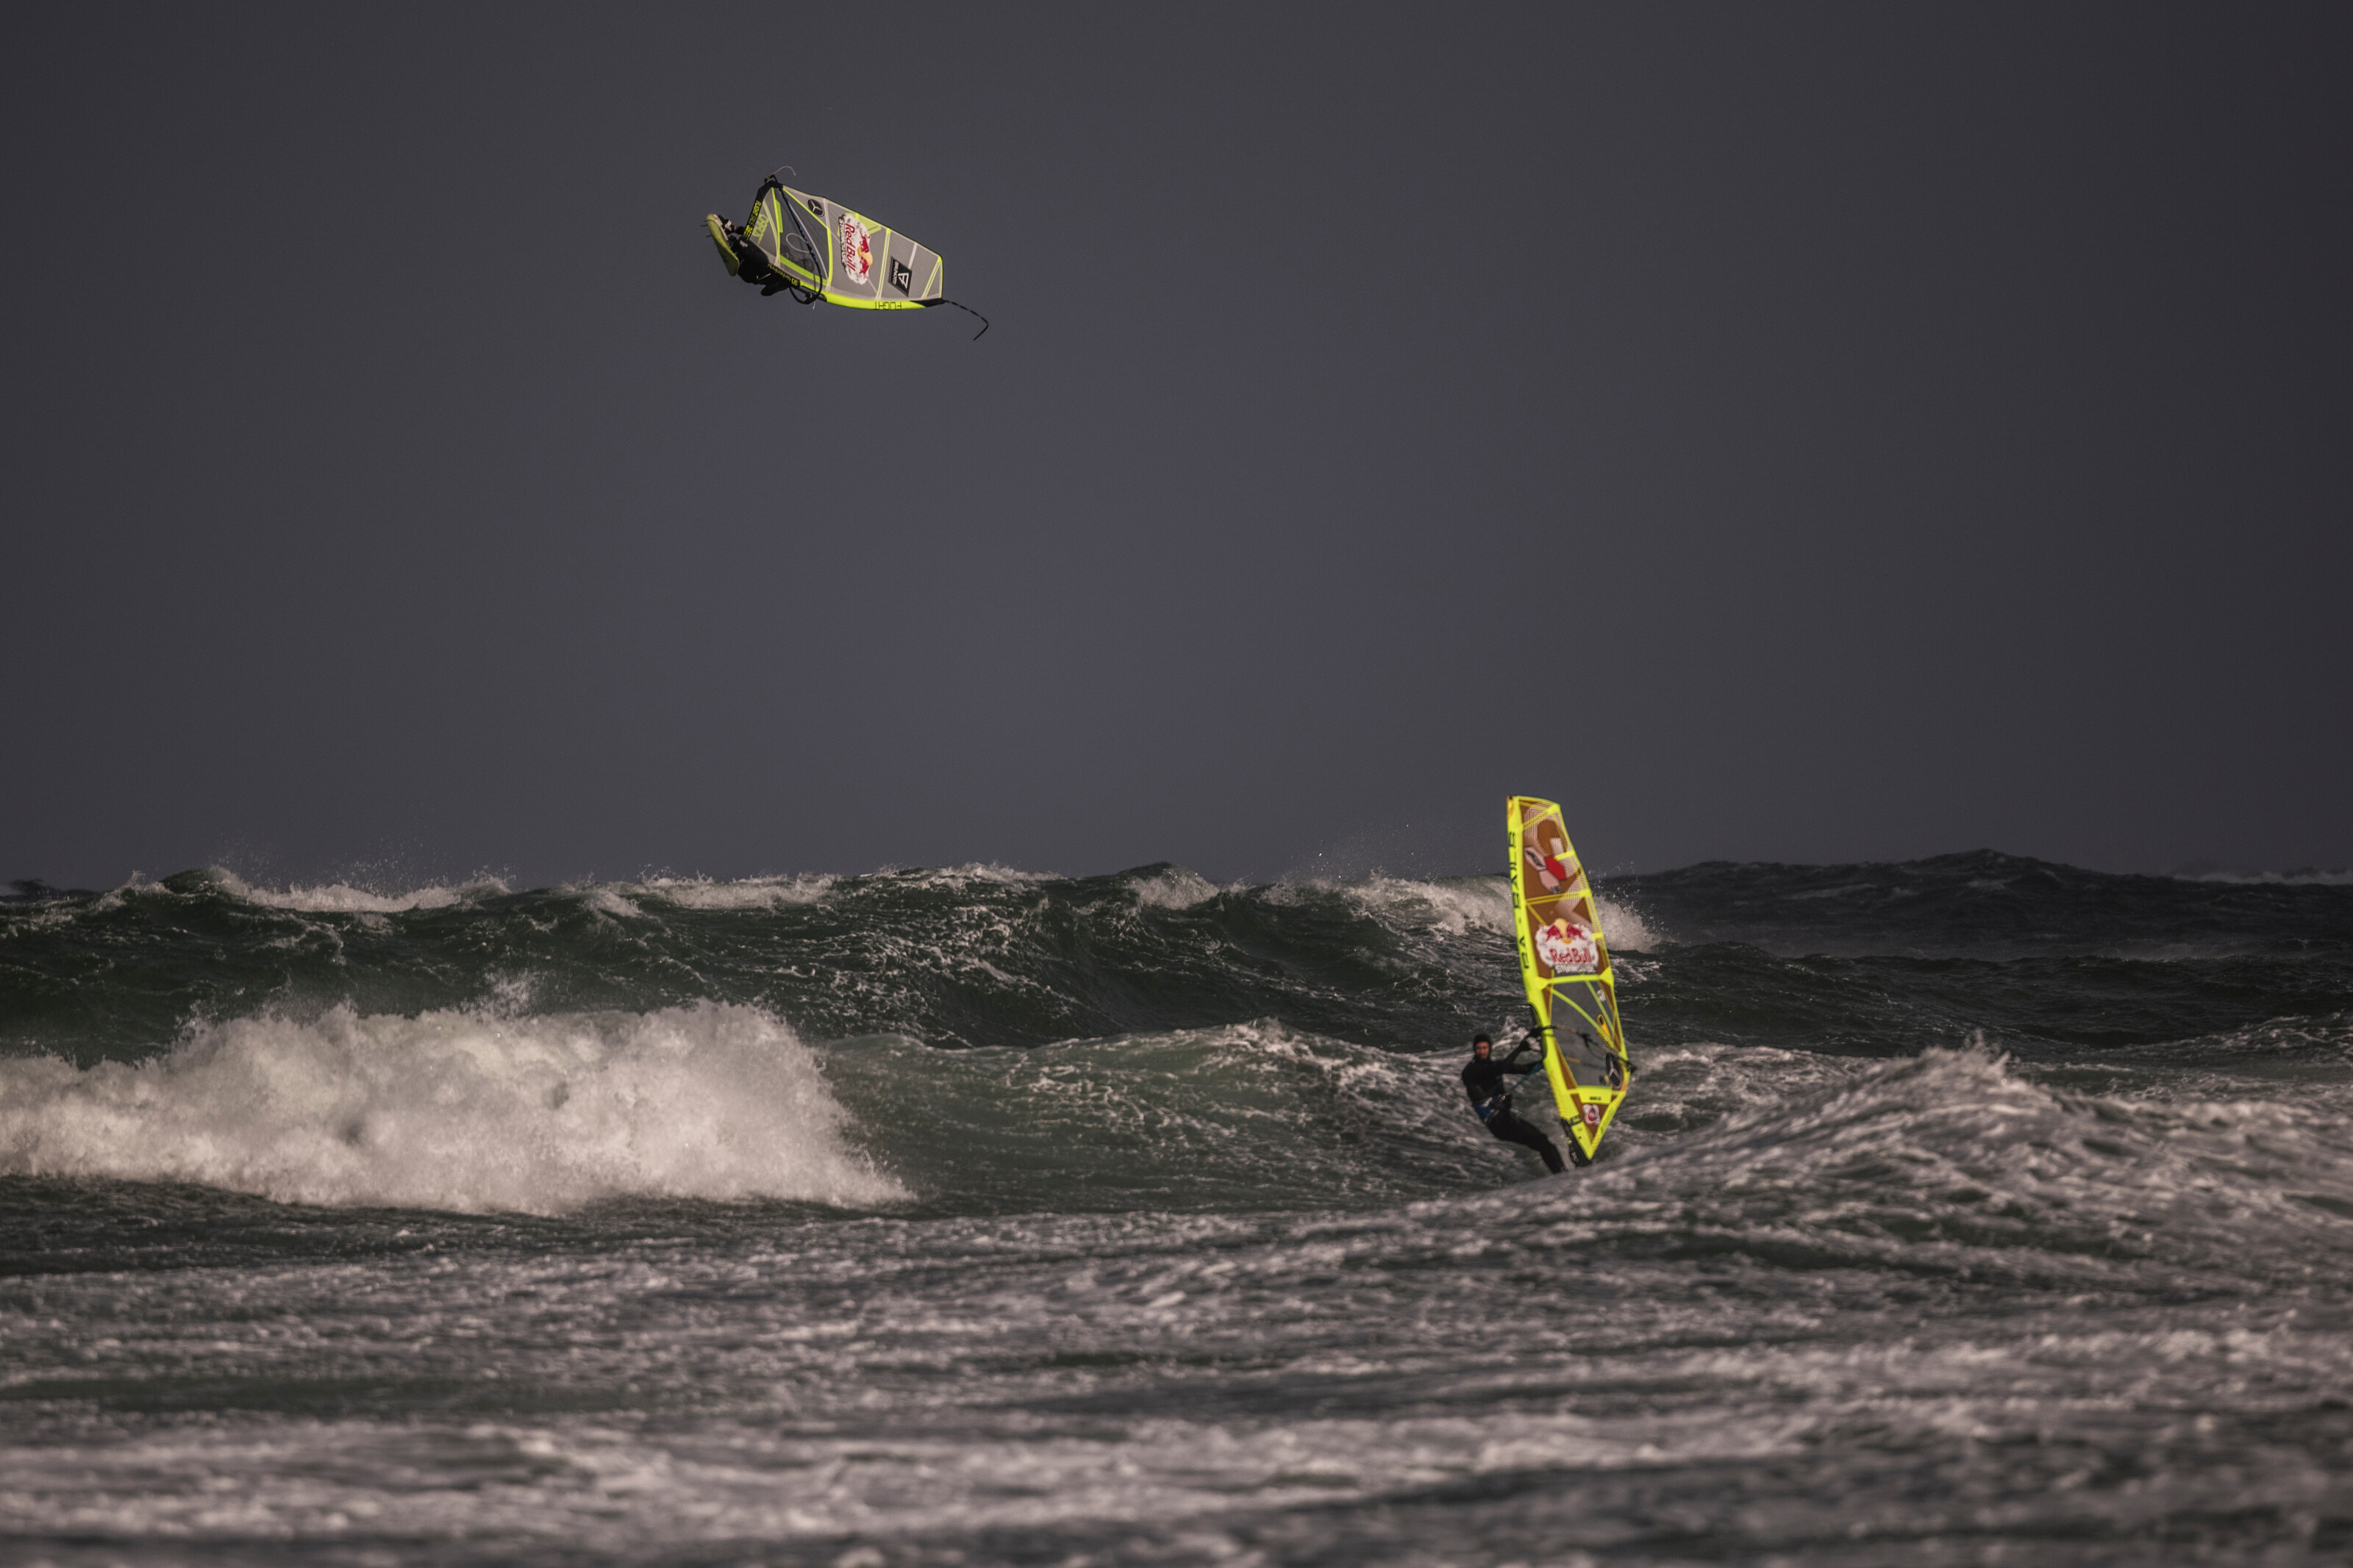 Ricardo Campello of Venezuela performs at the Red Bull Storm Chase in Magheroarty, Ireland on March 10, 2019. // Sebastian Marko/Red Bull Content Pool